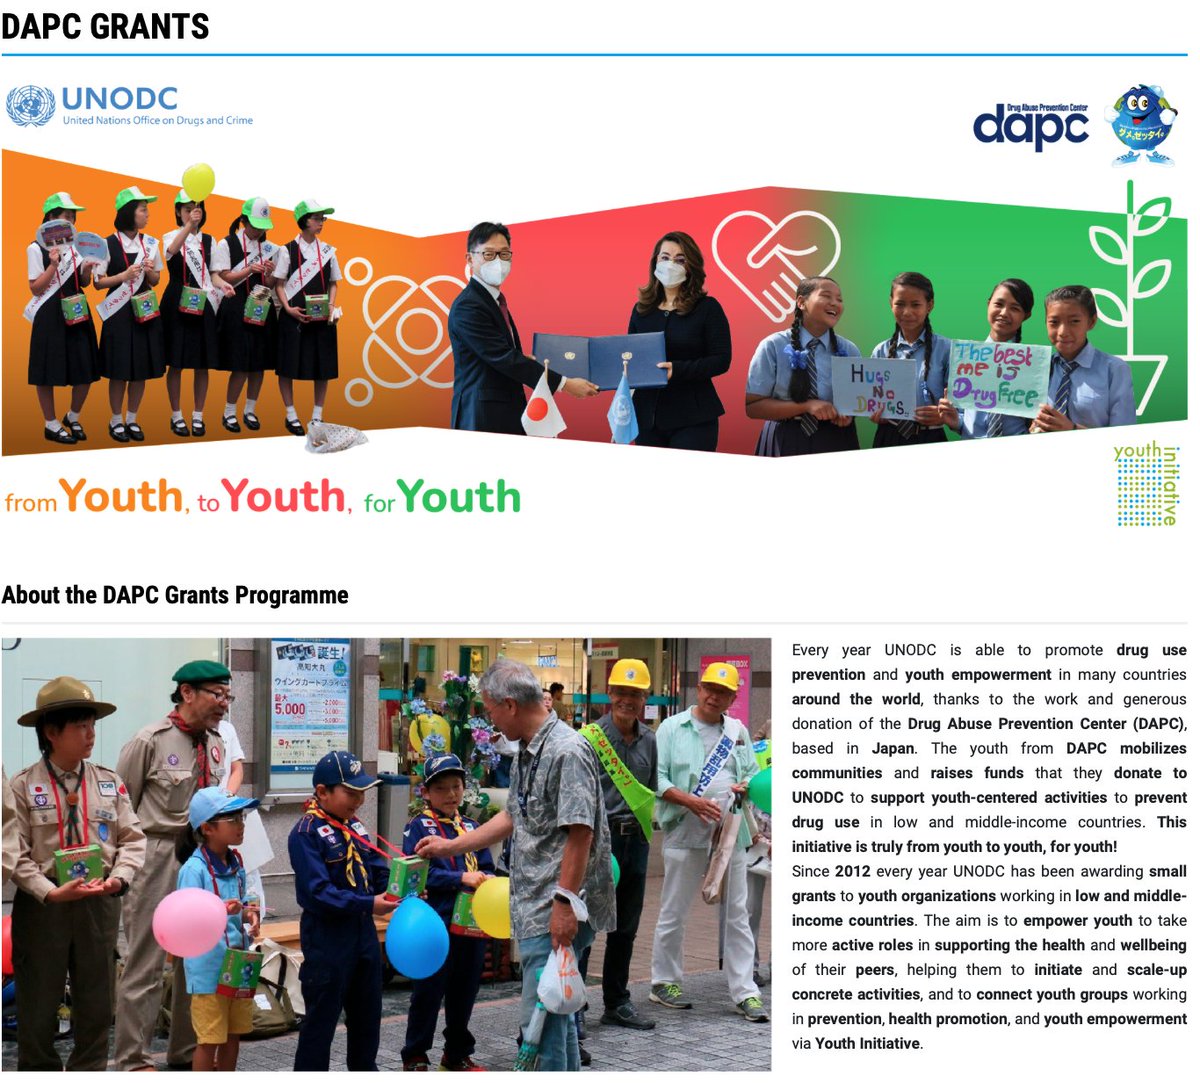 .@UNODC #DAPC Grants aims to directly support youth-centred prevention initiatives: ▶️raise awareness 🗣️ ▶️prevent substance use 💊 ▶️support youth as agents of change 🤝 Follow the link to learn more about the grants: 🔗is.gd/jPZnvv @dapc_damezettai @JapanMissionVie